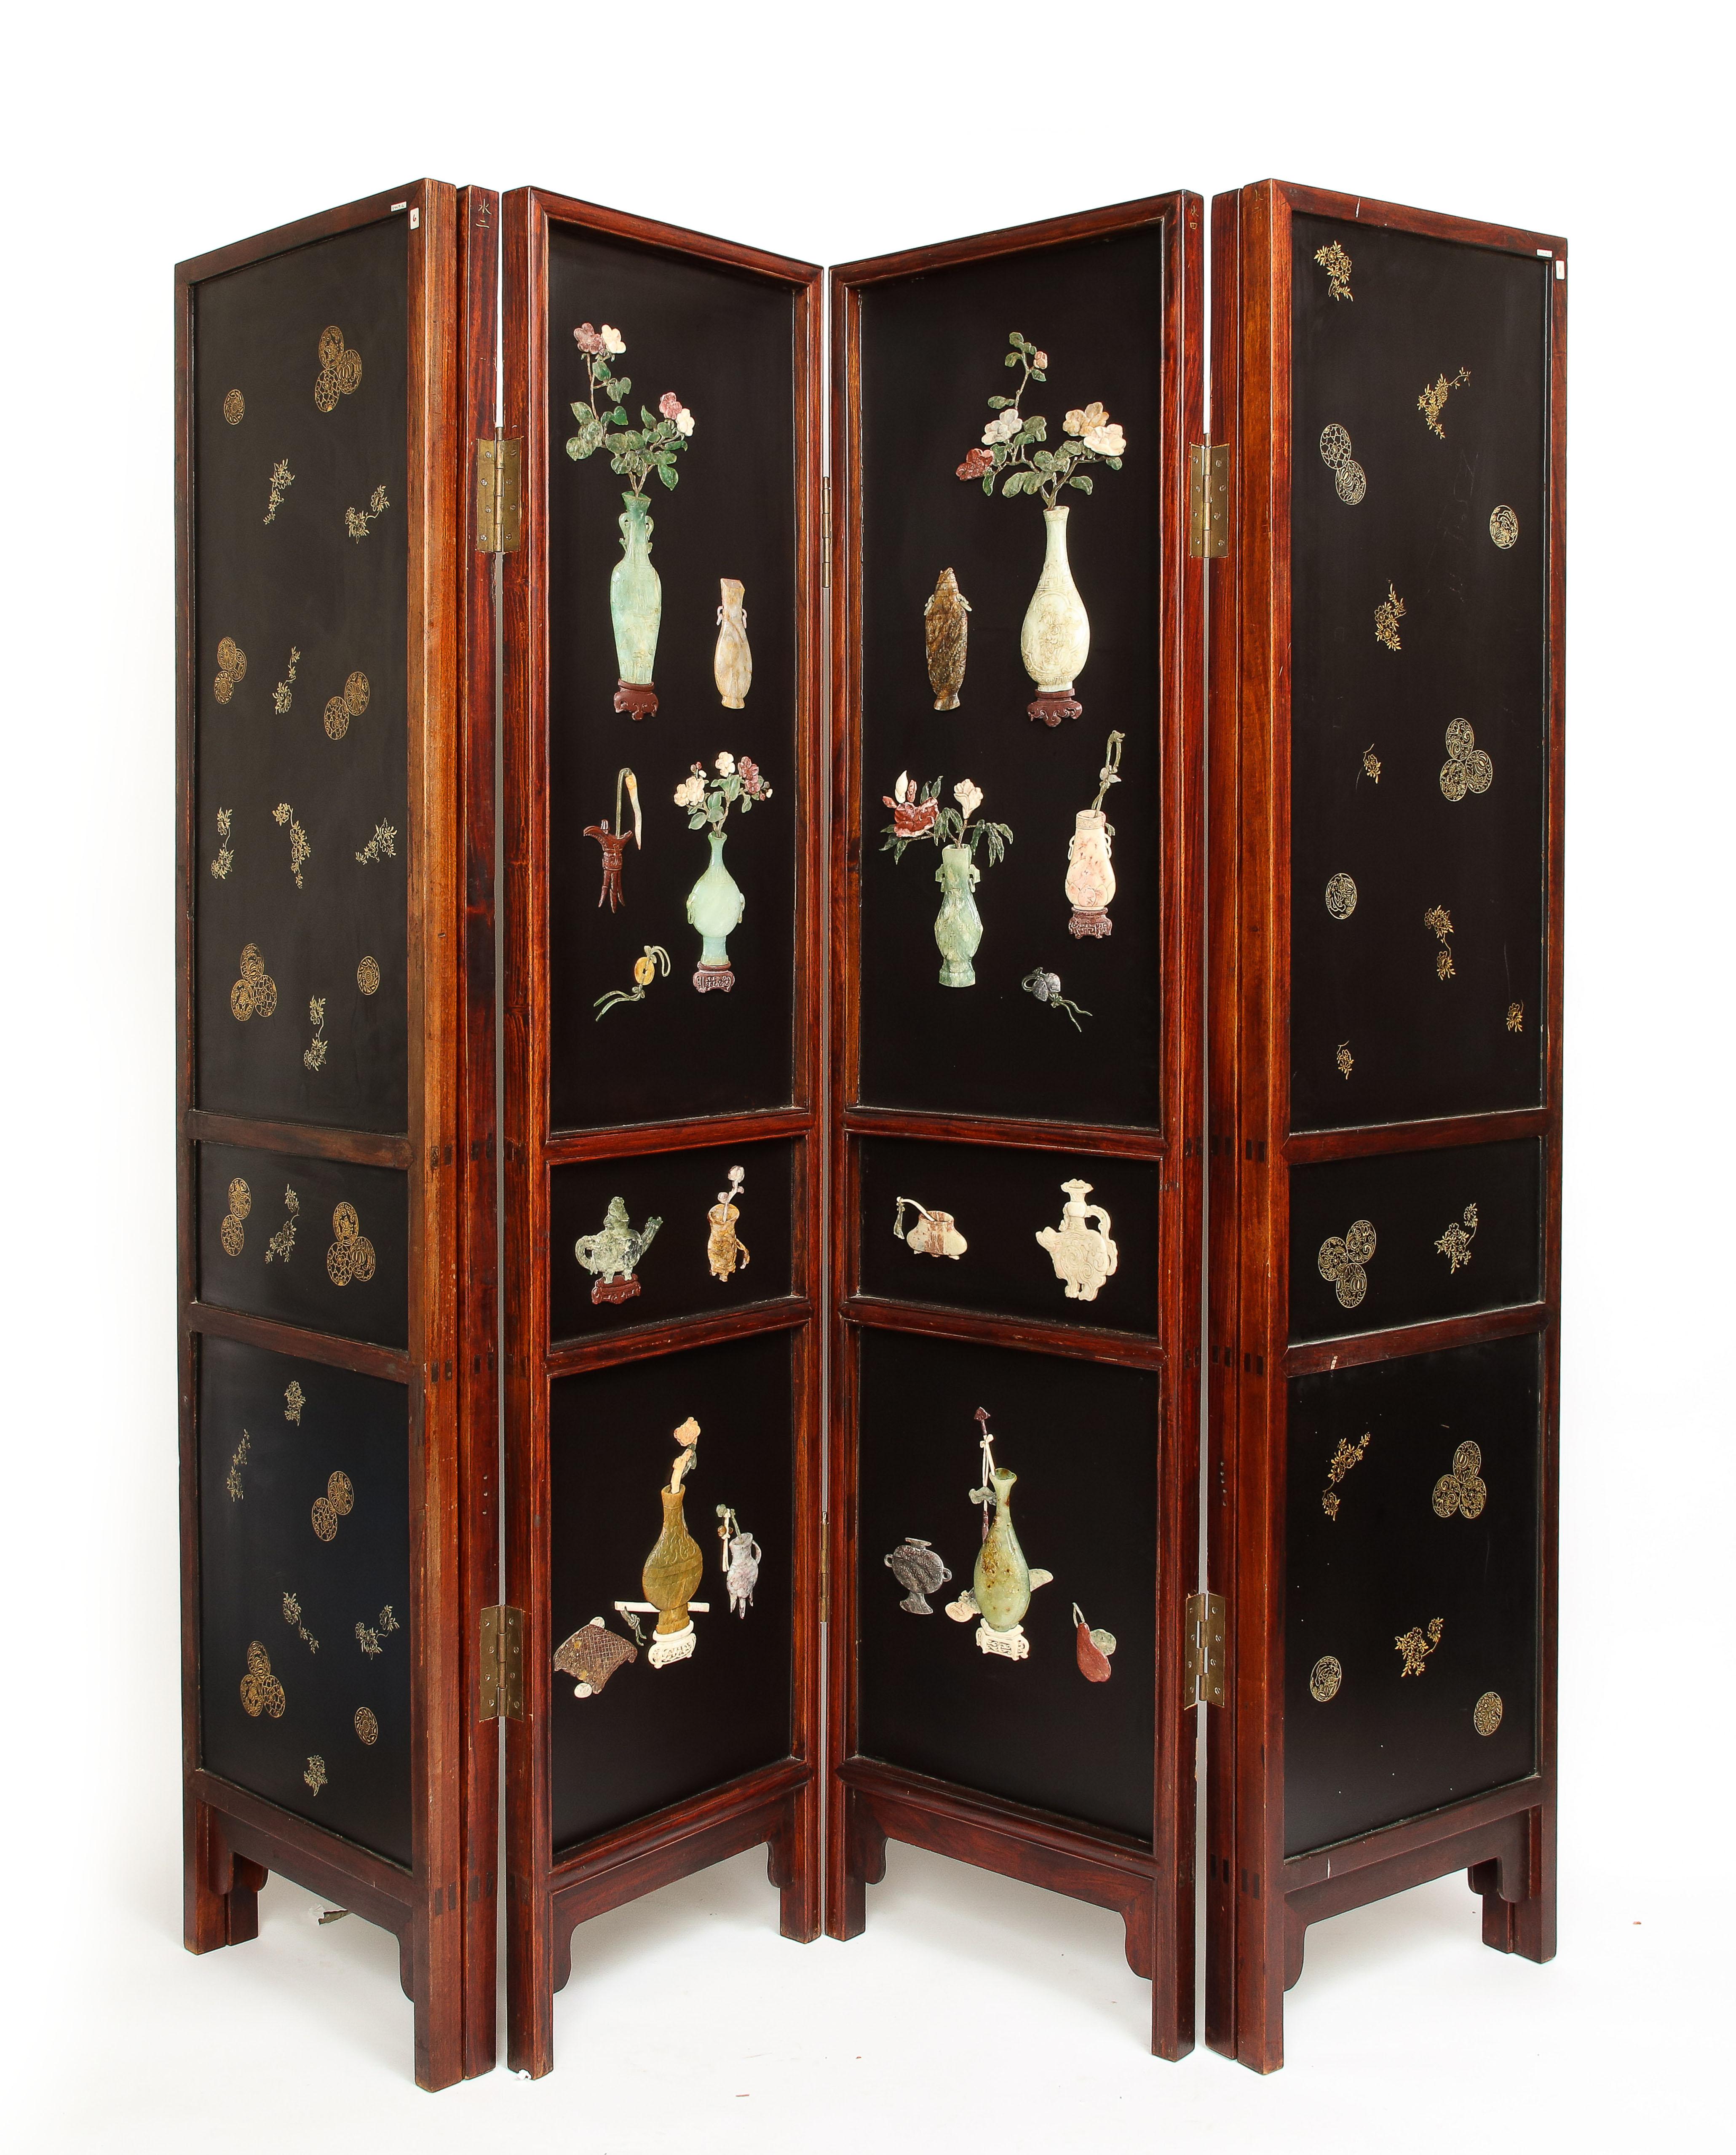 Qing Large 20th C. Chinese 6 Panel Lacquered Hardstone and Jade Coromandel Screen For Sale